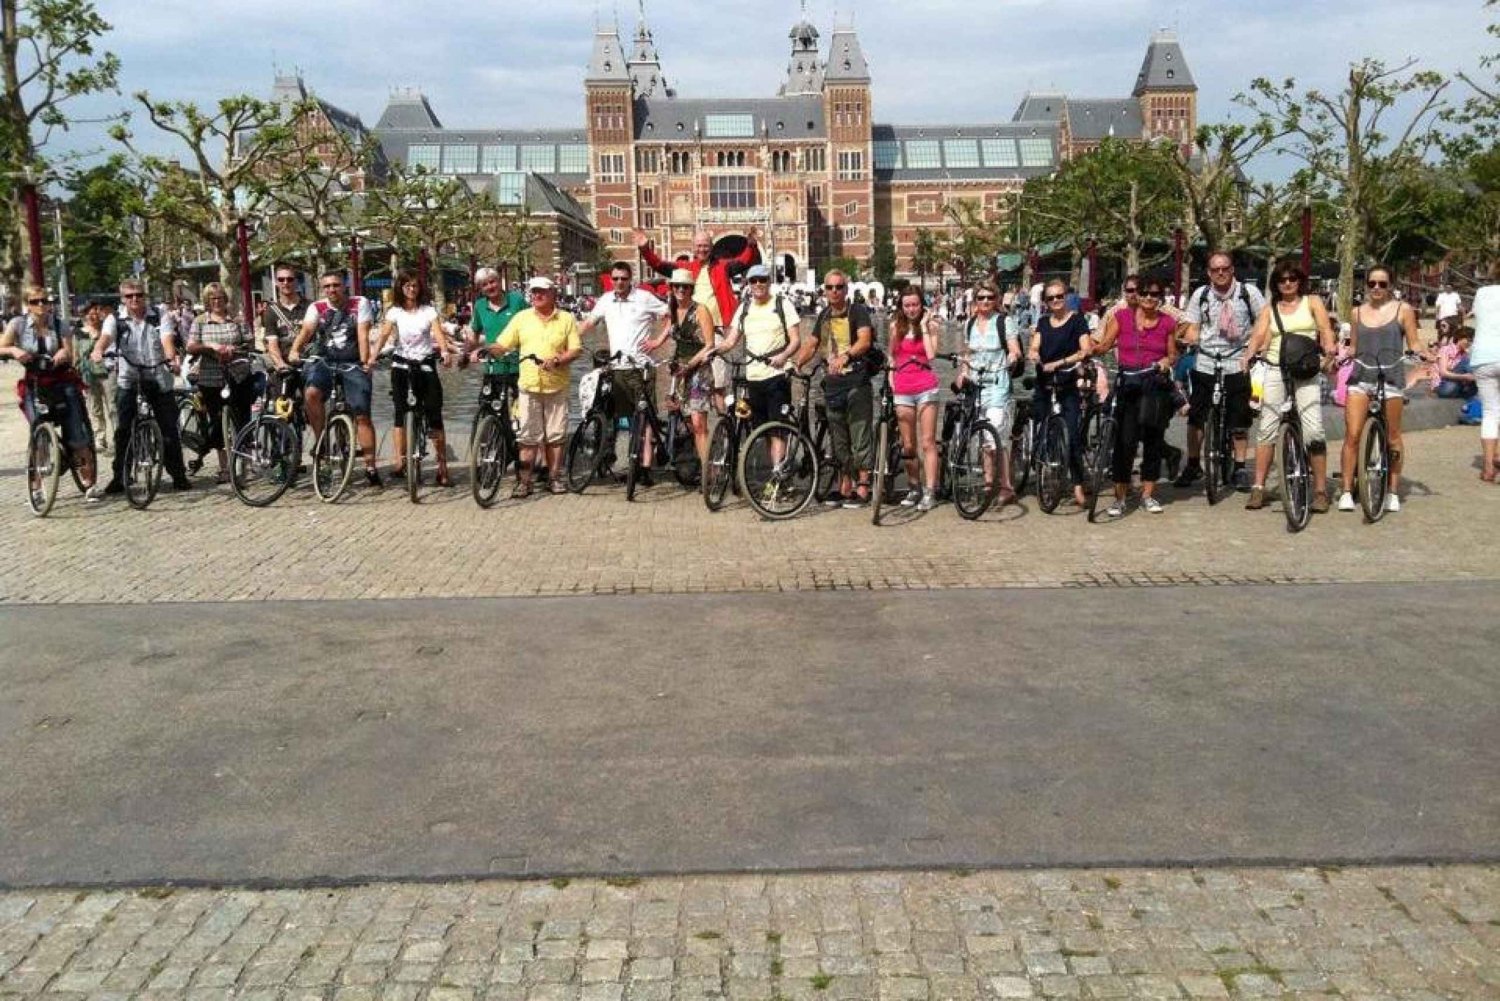 Cycle-Along-the-Canals